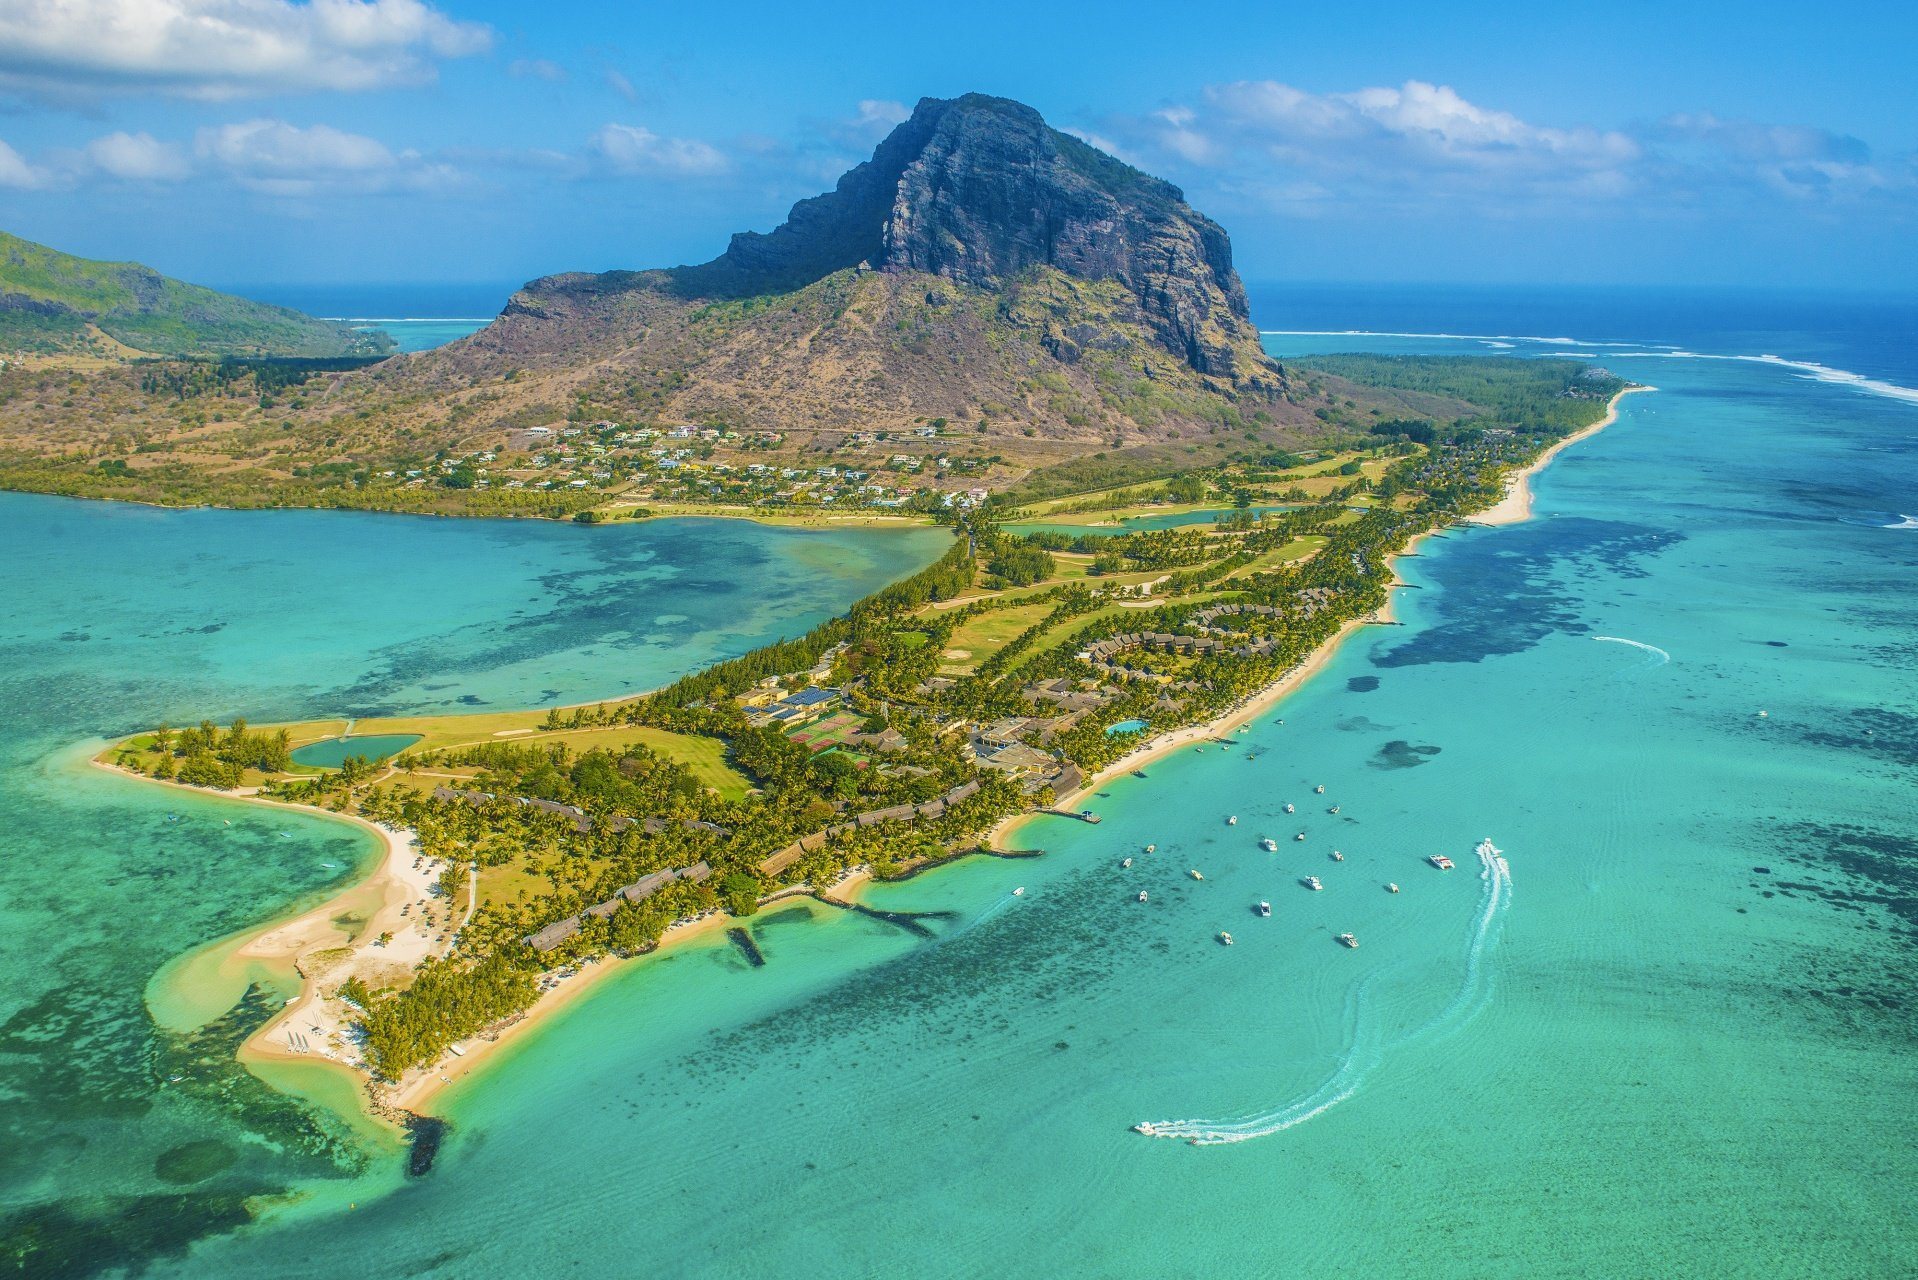 Mauritius: a colourful tranquillity